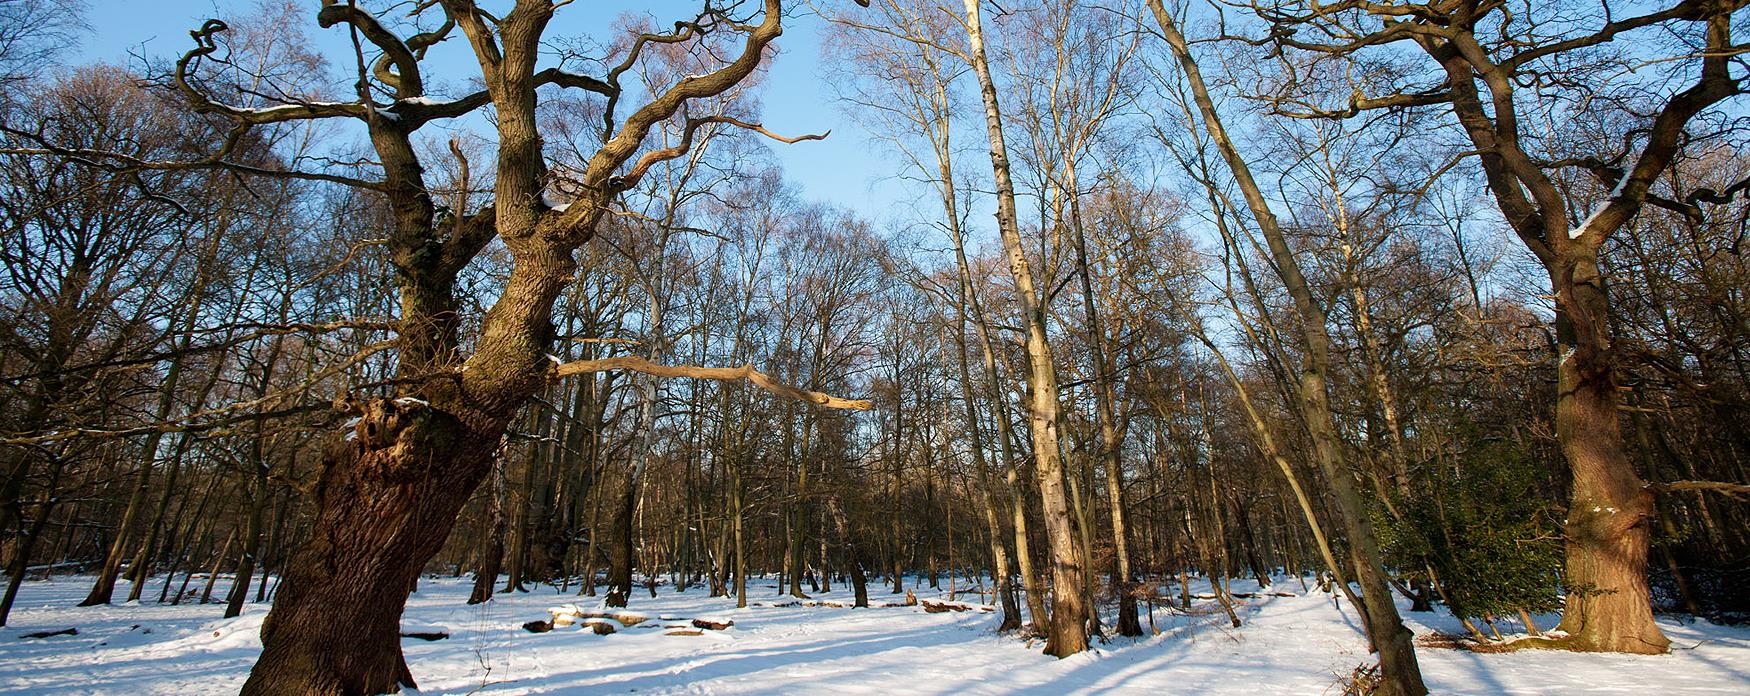 Epping Forest trees in snow by John Price